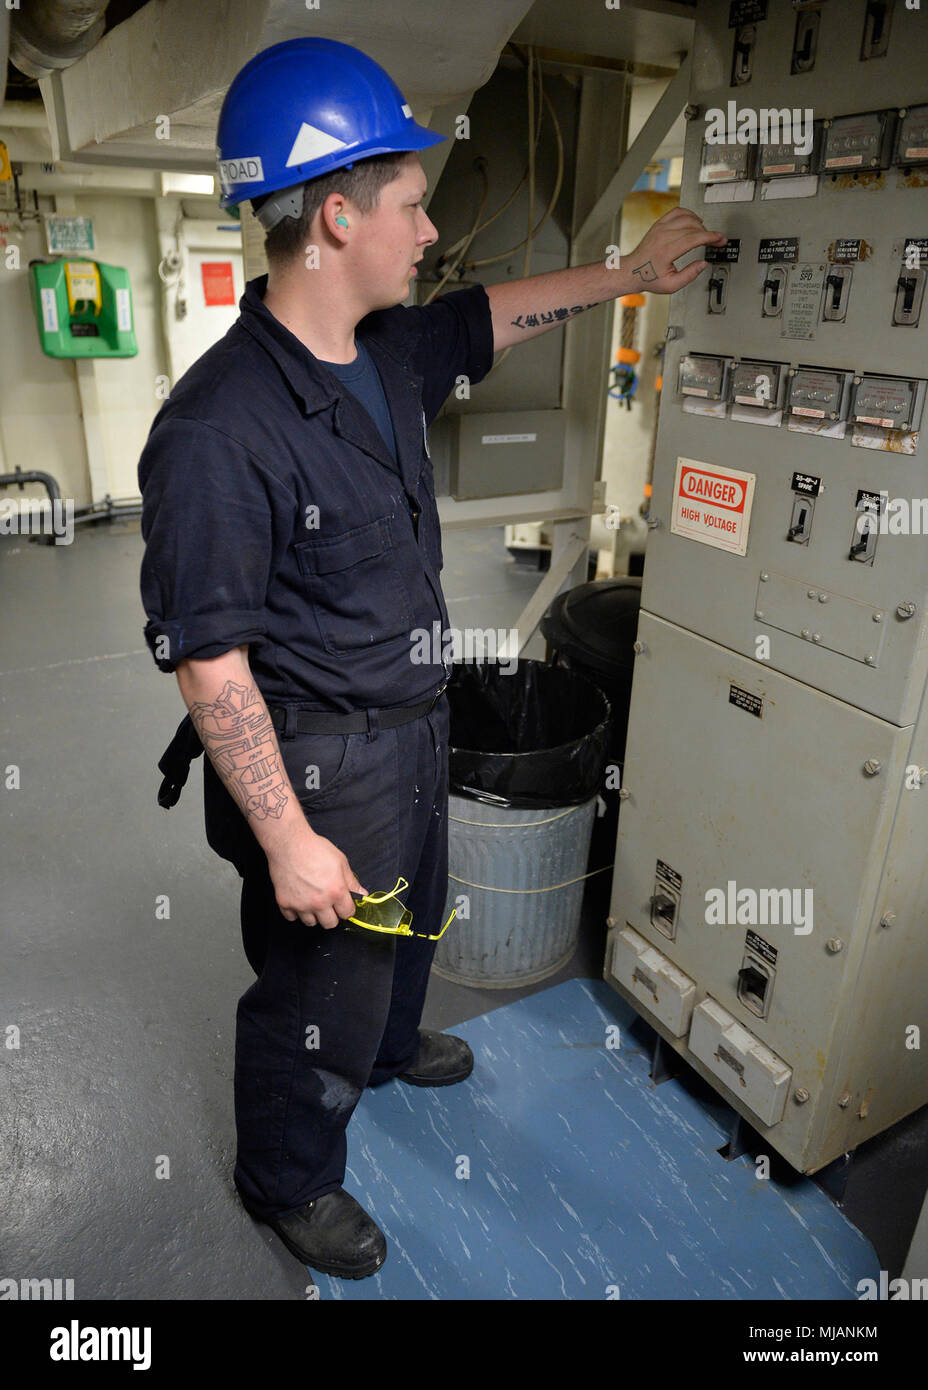 180425-N-YM543-129 YOKOSUKA, Japan (April 25, 2018) - Fireman Trustin  Nasalroad, from Edmond, Okla., secures the ship's AC for material condition  checks in preparation for light off assessment in two weeks. LOA ensures